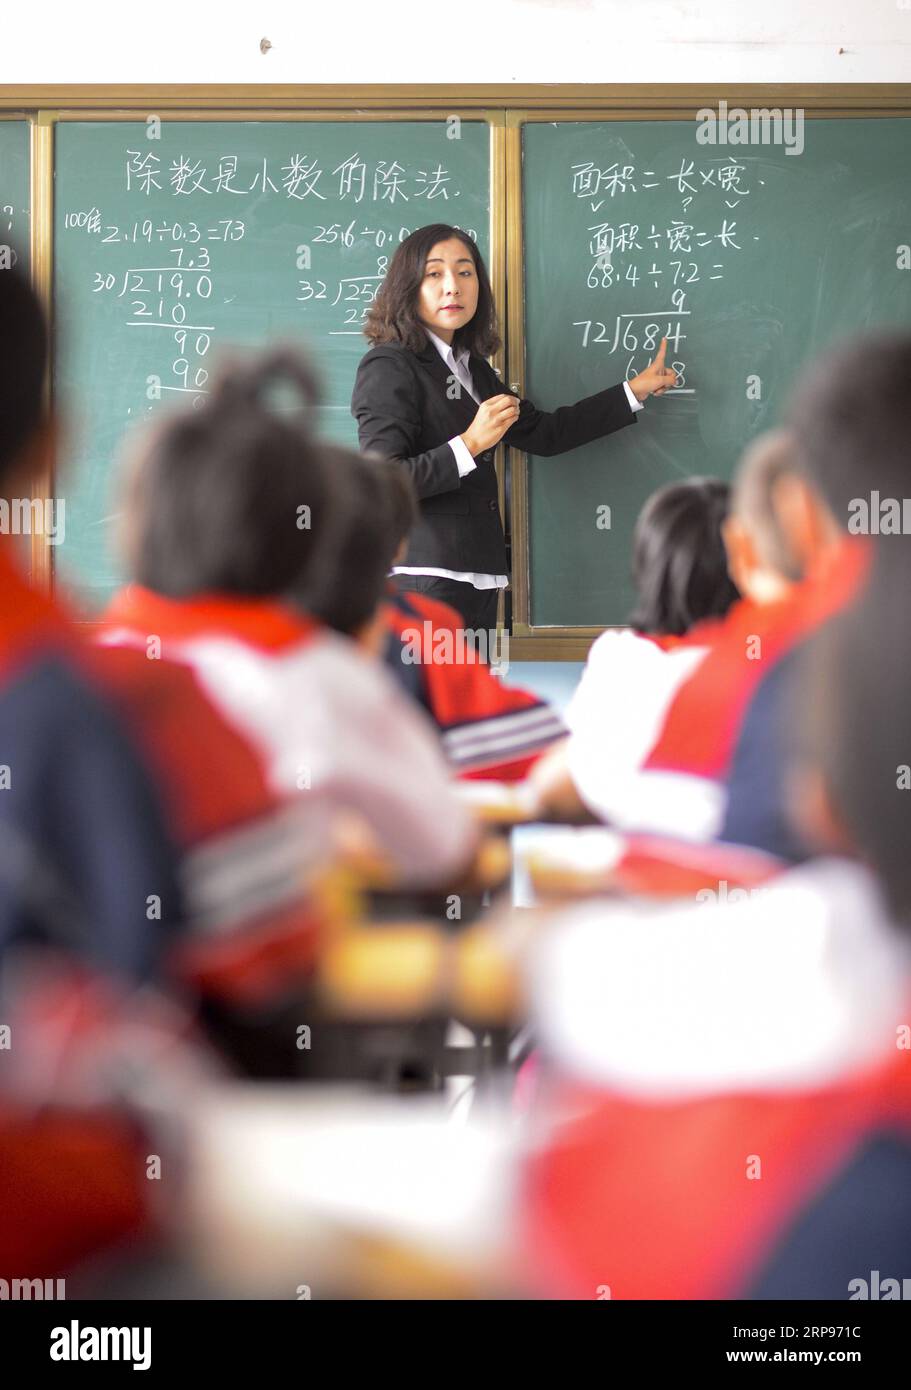 (190327) -- BEIJING, March 27, 2019 (Xinhua) -- A teacher gives a lesson to students at the central primary school of Tuokezhake Township in Shufu County, northwest China s Xinjiang Uygur Autonomous Region, Sept. 26, 2017. China s efforts to promote the balanced development of compulsory education, which usually means narrowing inter-regional, rural-urban or inter-school gaps in terms of education conditions and quality, has borne fruit, the Ministry of Education said Tuesday. According to the ministry, the balanced development of compulsory education has been achieved in 2,717 counties, repre Stock Photo